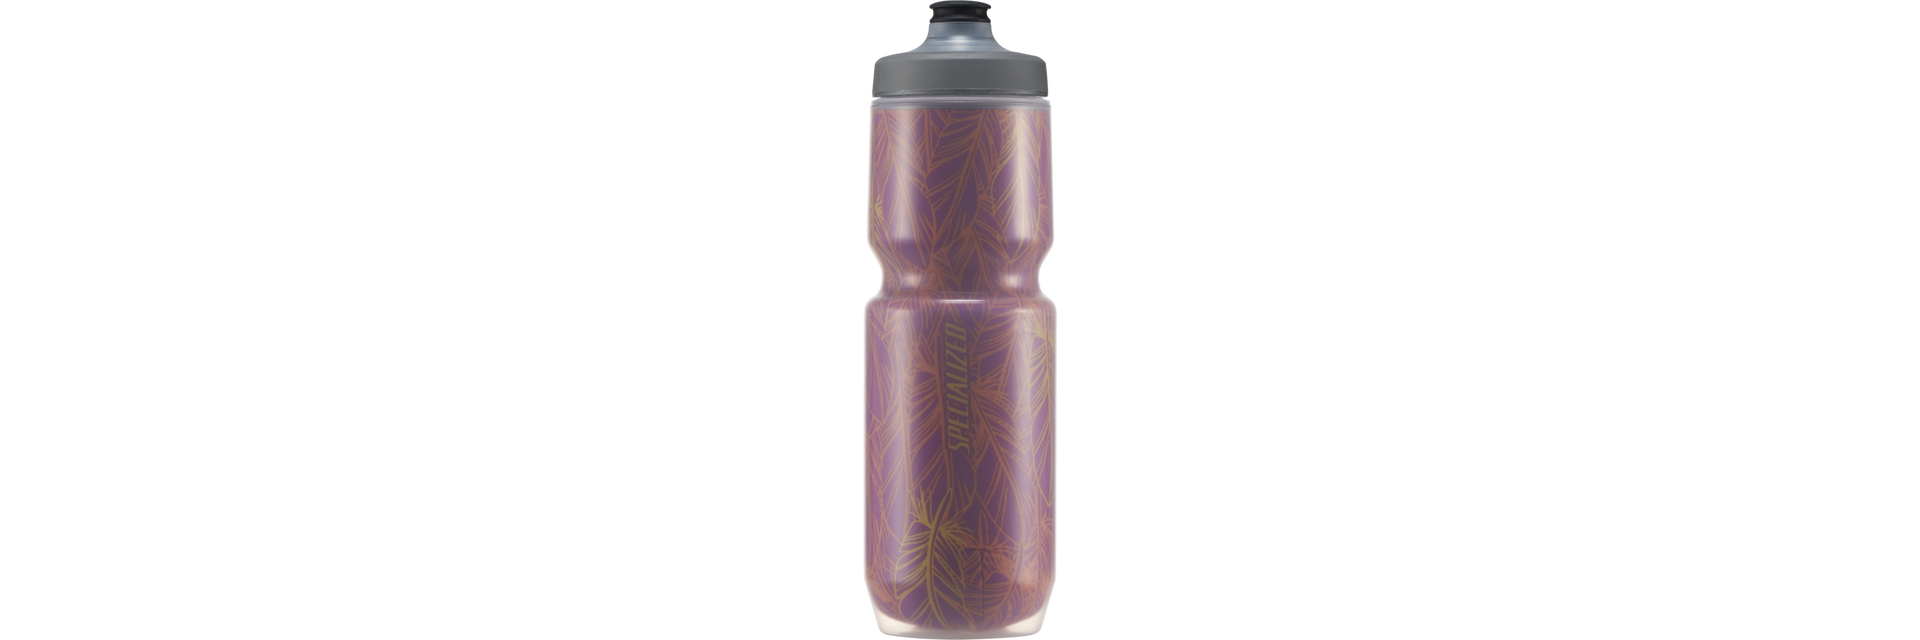 Specialized Purist Insulated Chromatek Watergate Water Bottle 23oz Feather